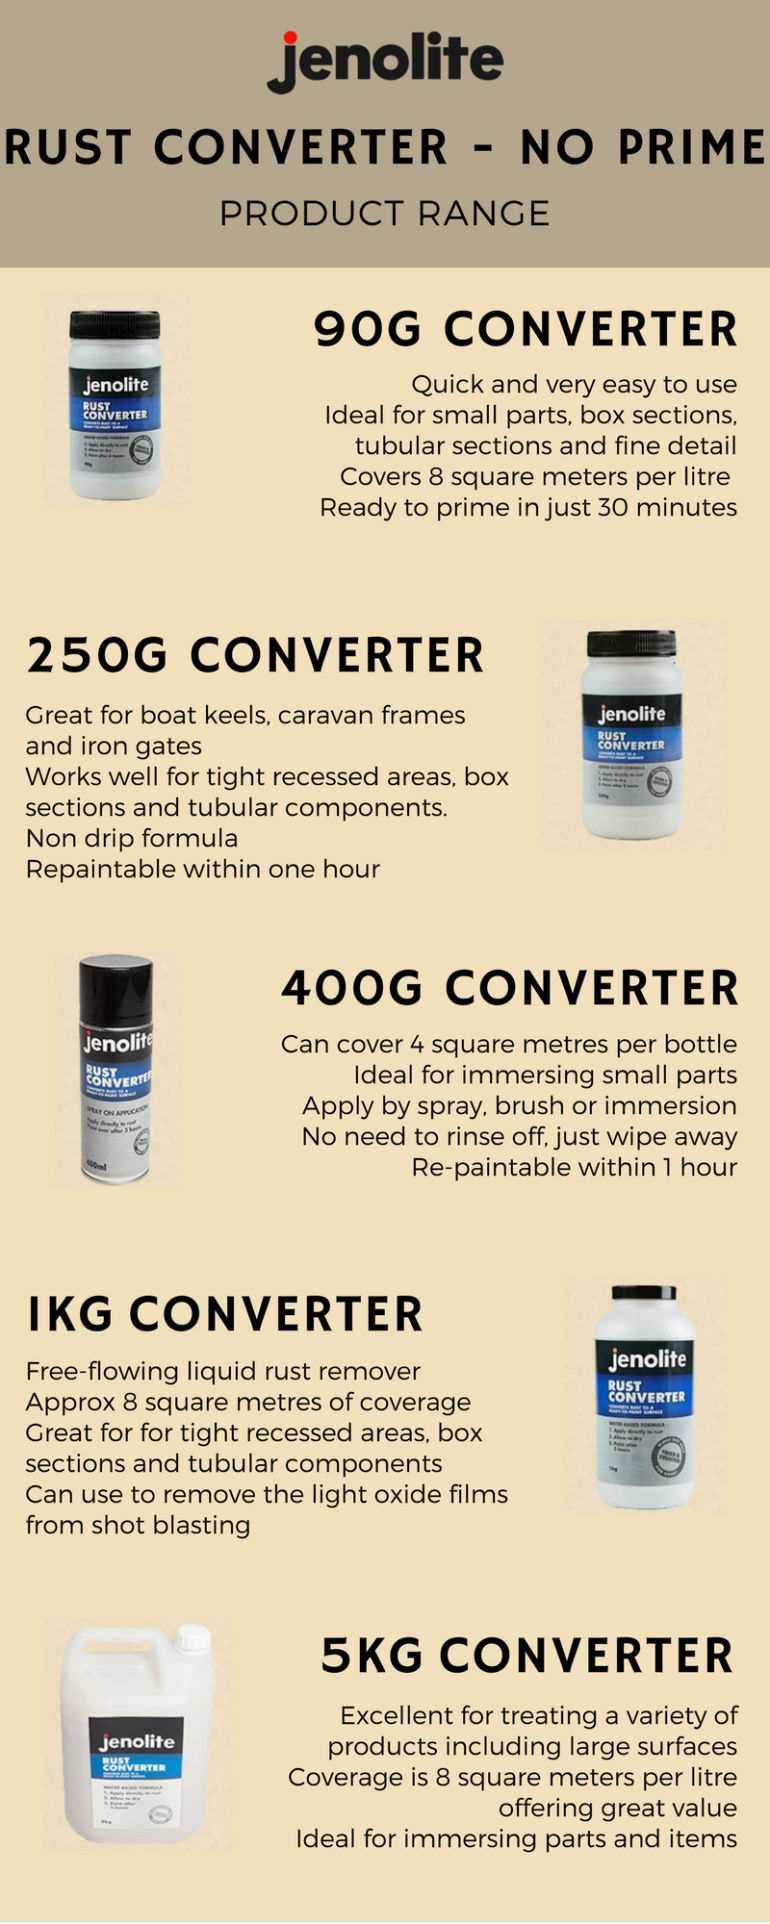 GET RID OF RUST with Jenolite Rust Converter – No Prime: Product Range